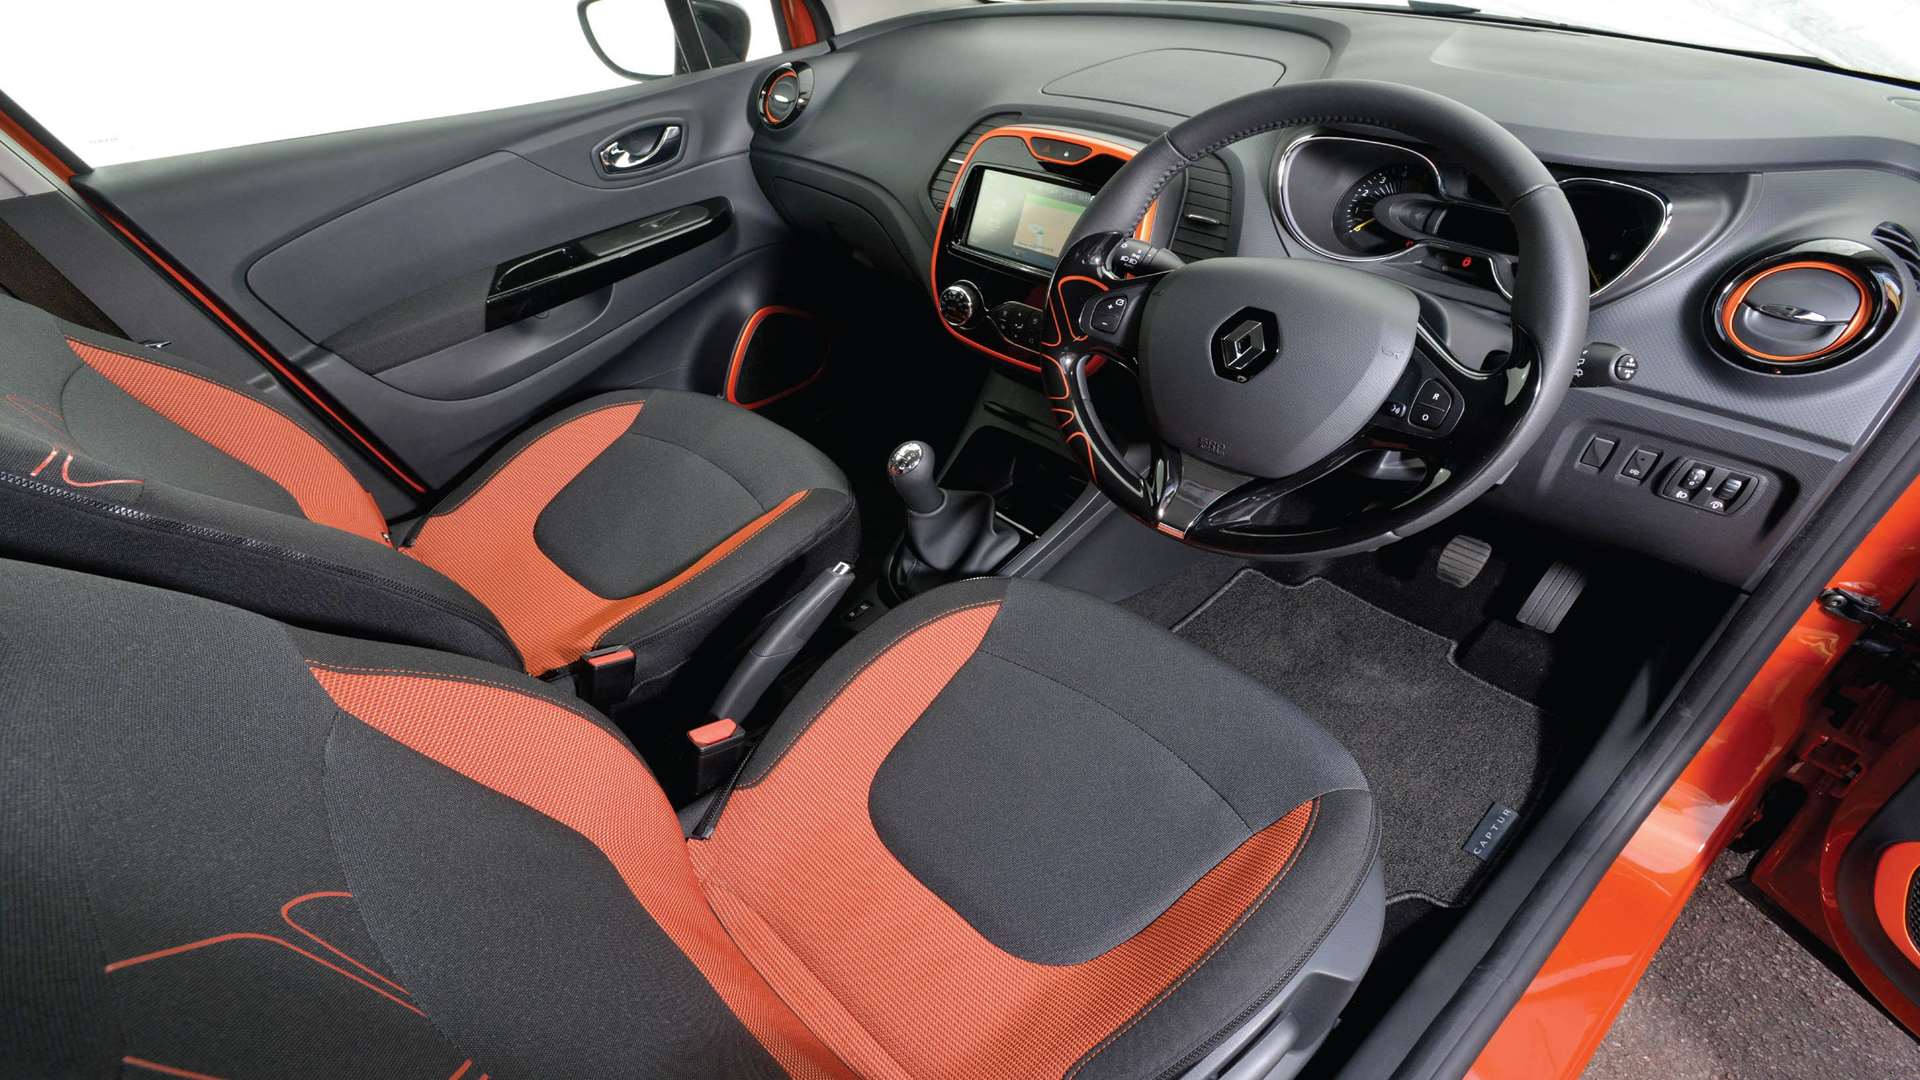 The interior is as bold as the exterior